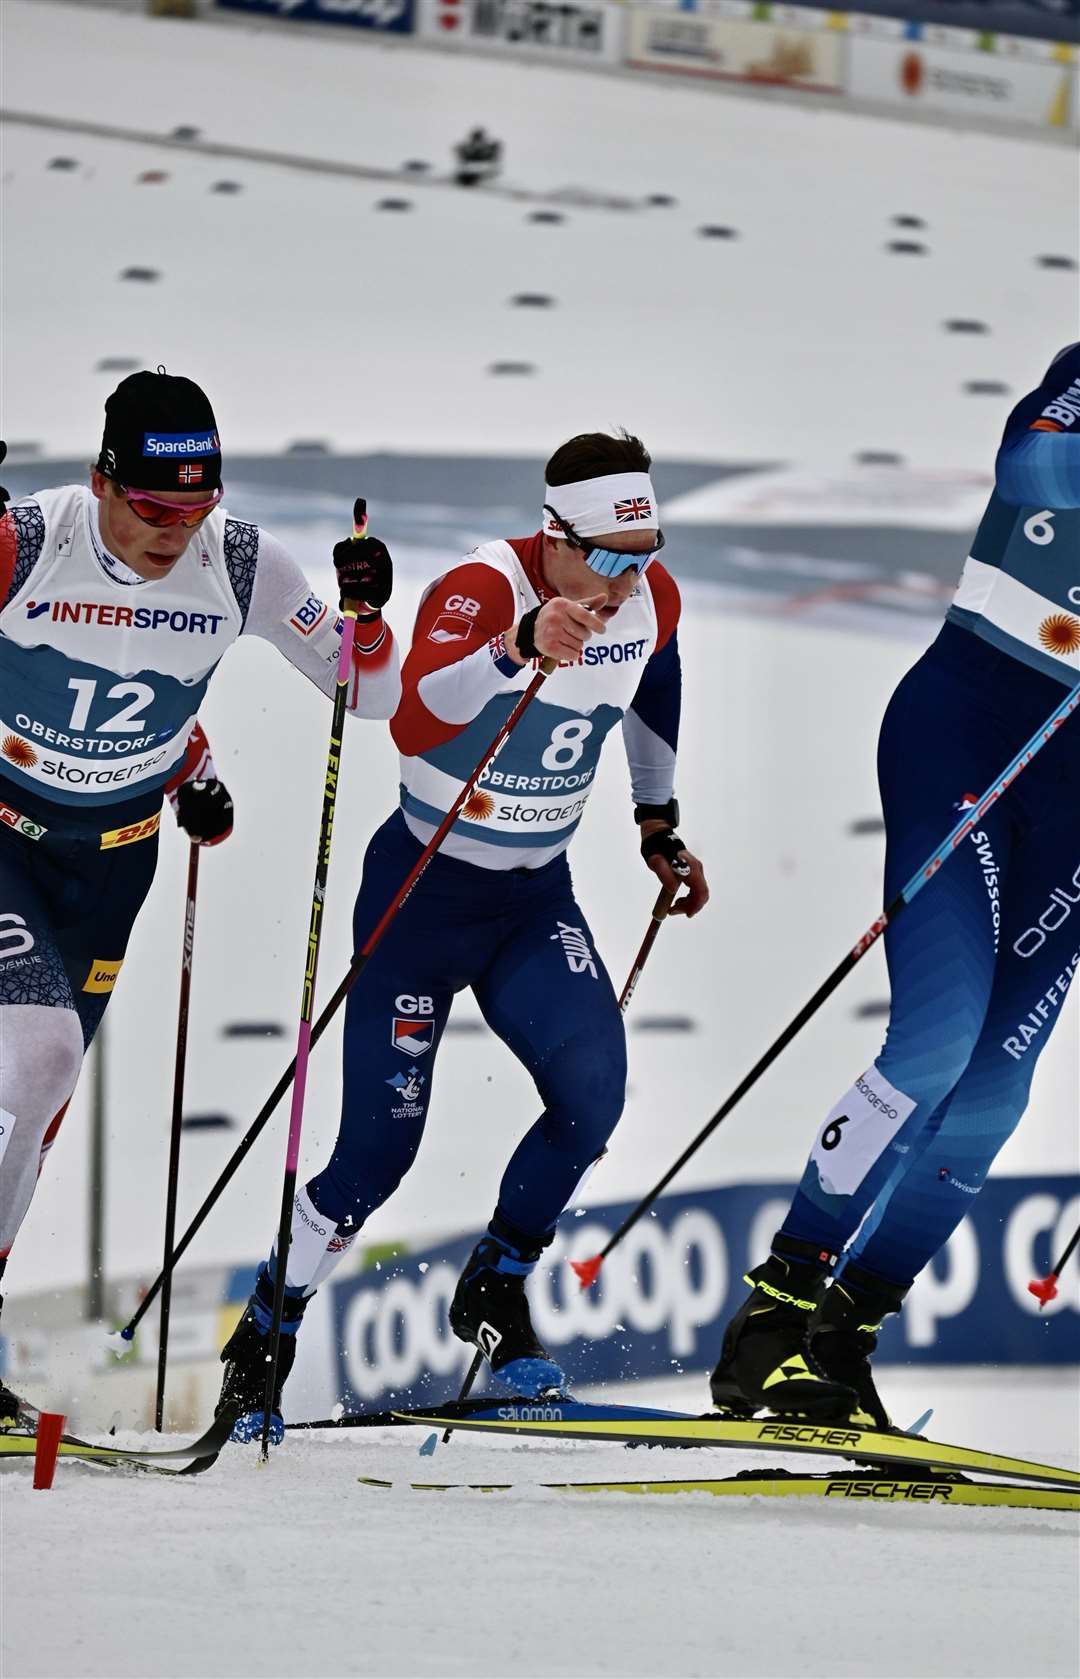 Andrew Musgrave in action at the world cross country ski championships in Germany.